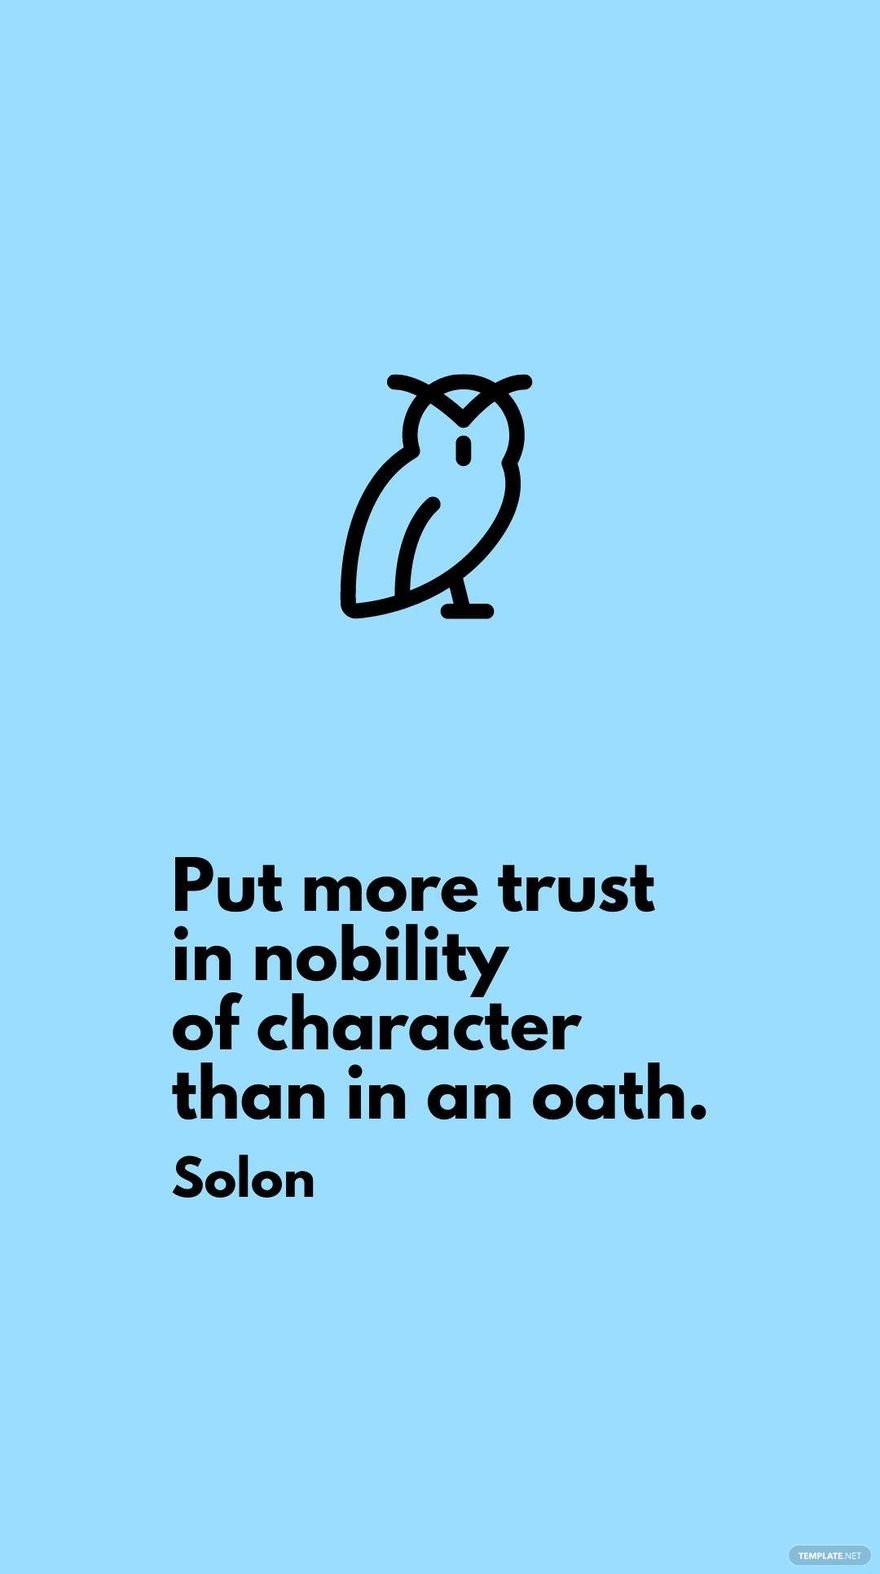 Free Solon - Put more trust in nobility of character than in an oath.